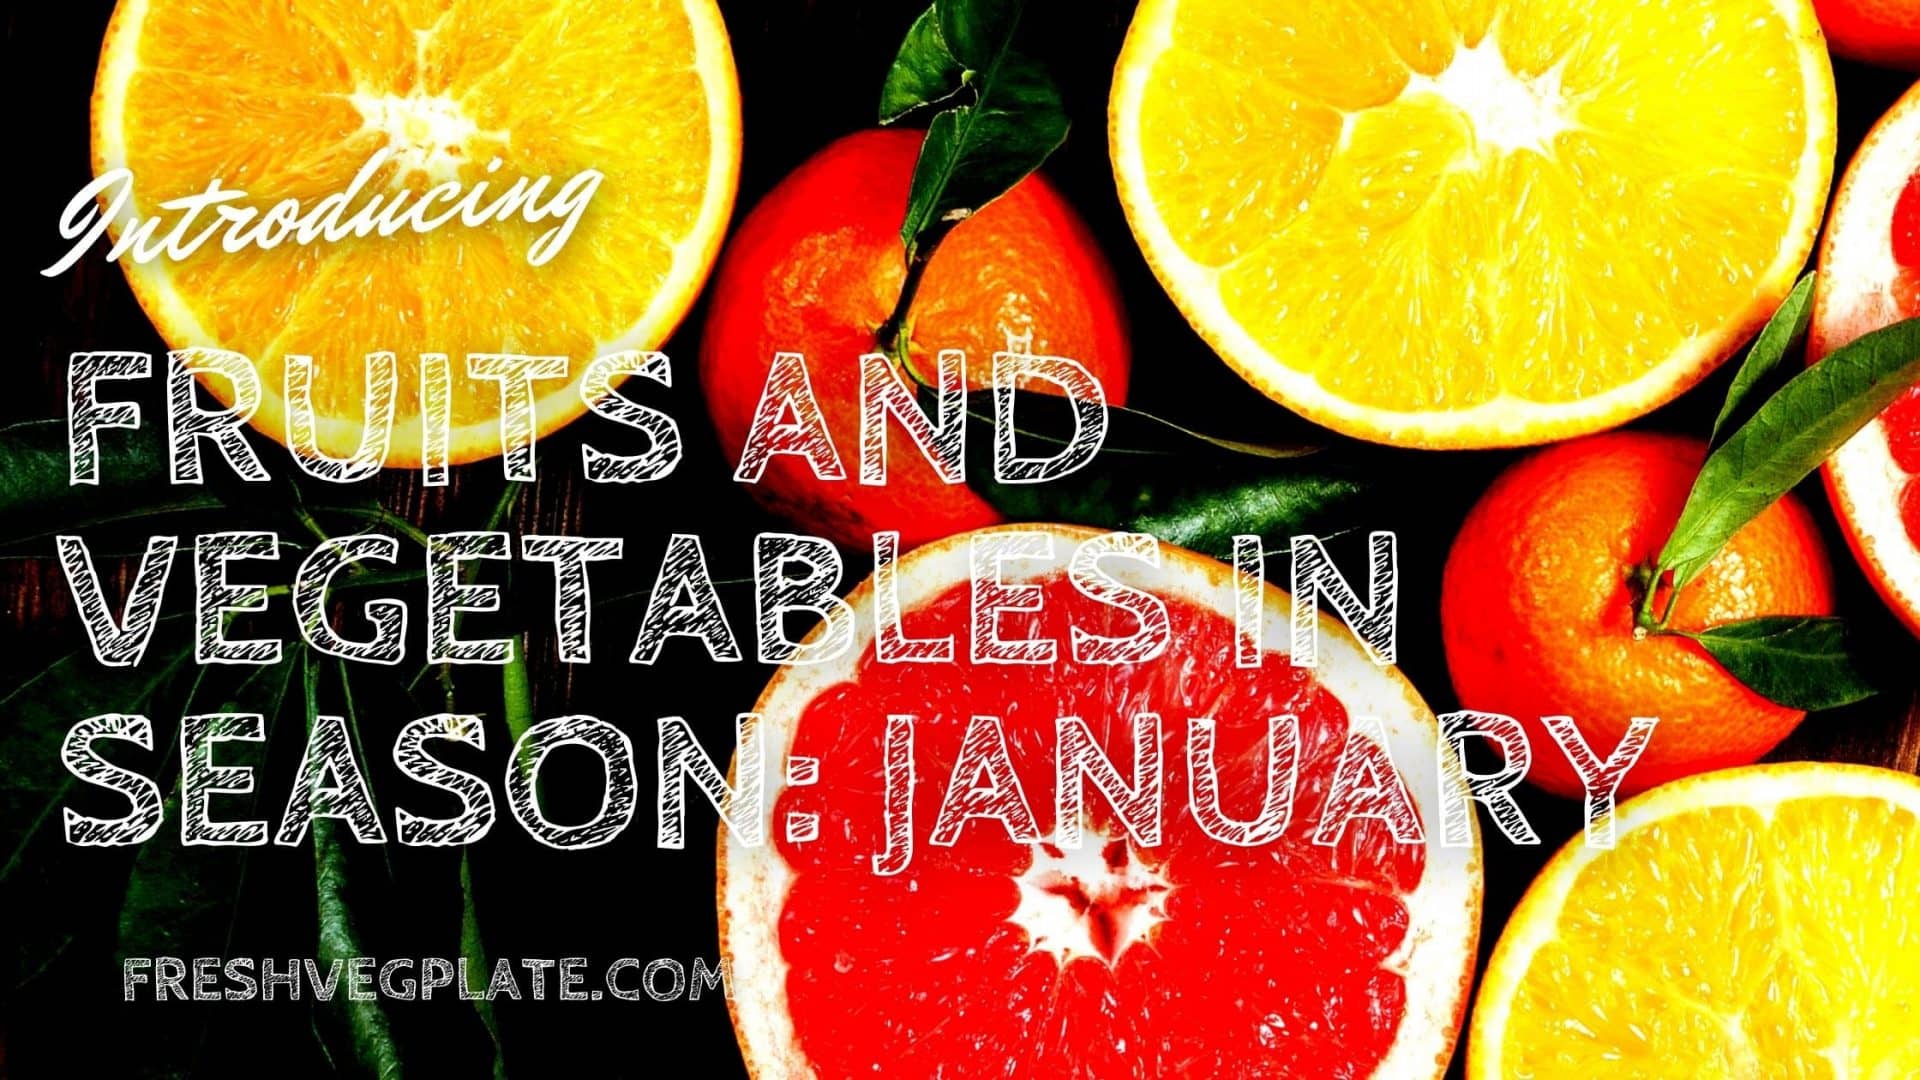 Fruits and vegetables in season January